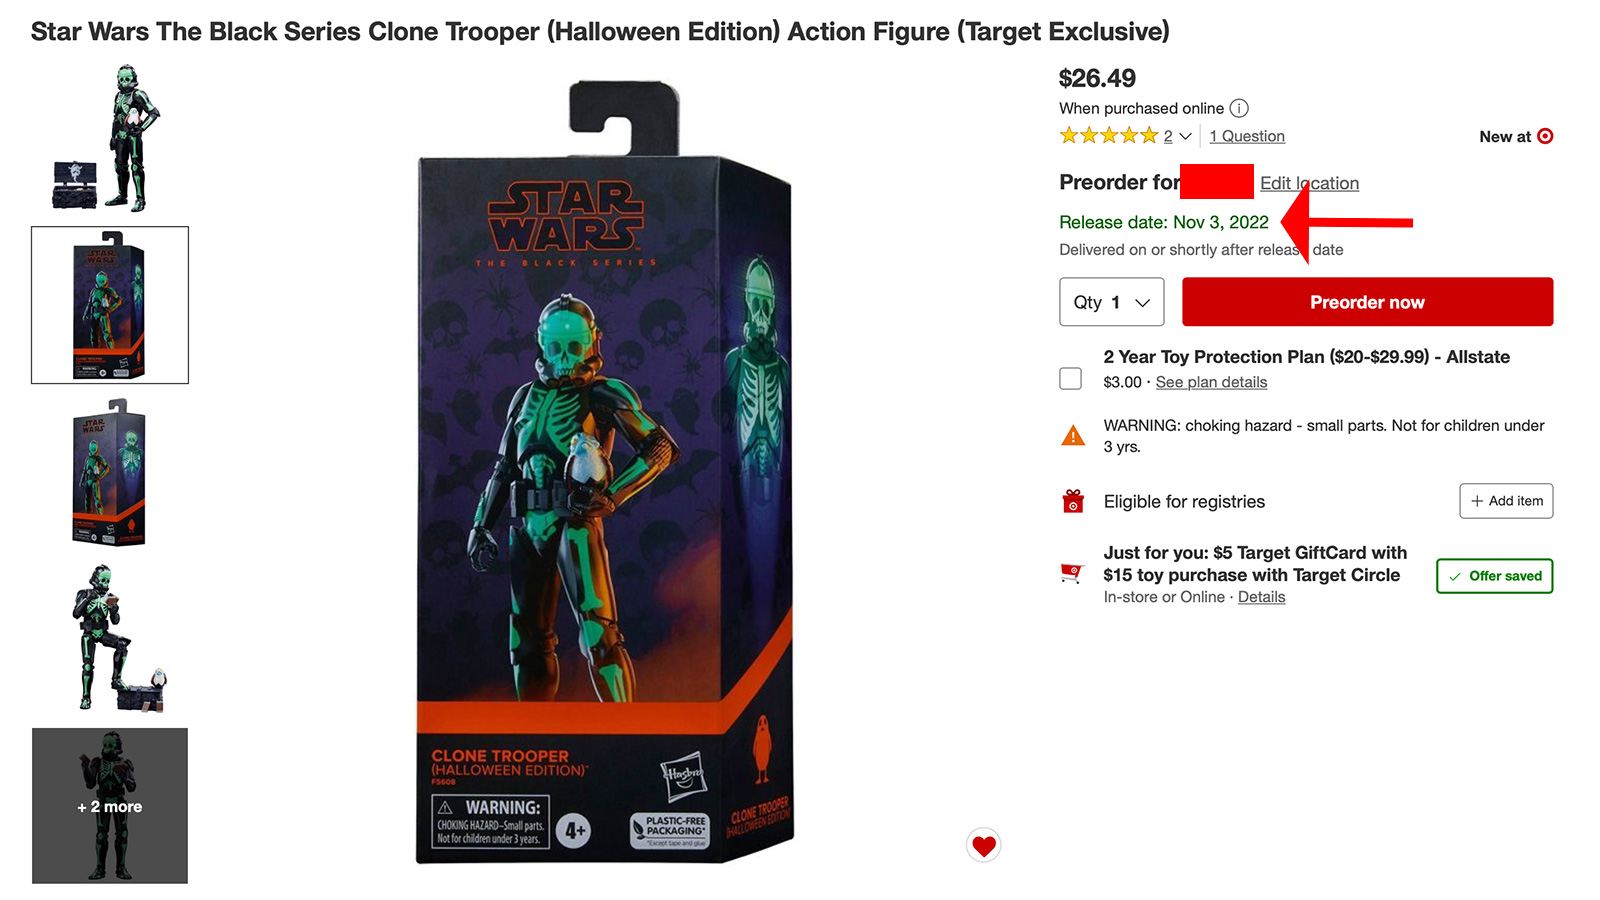 Target Posts Release Date For Exclusive The Black Series 6-Inch Clone Trooper (Halloween Edition)